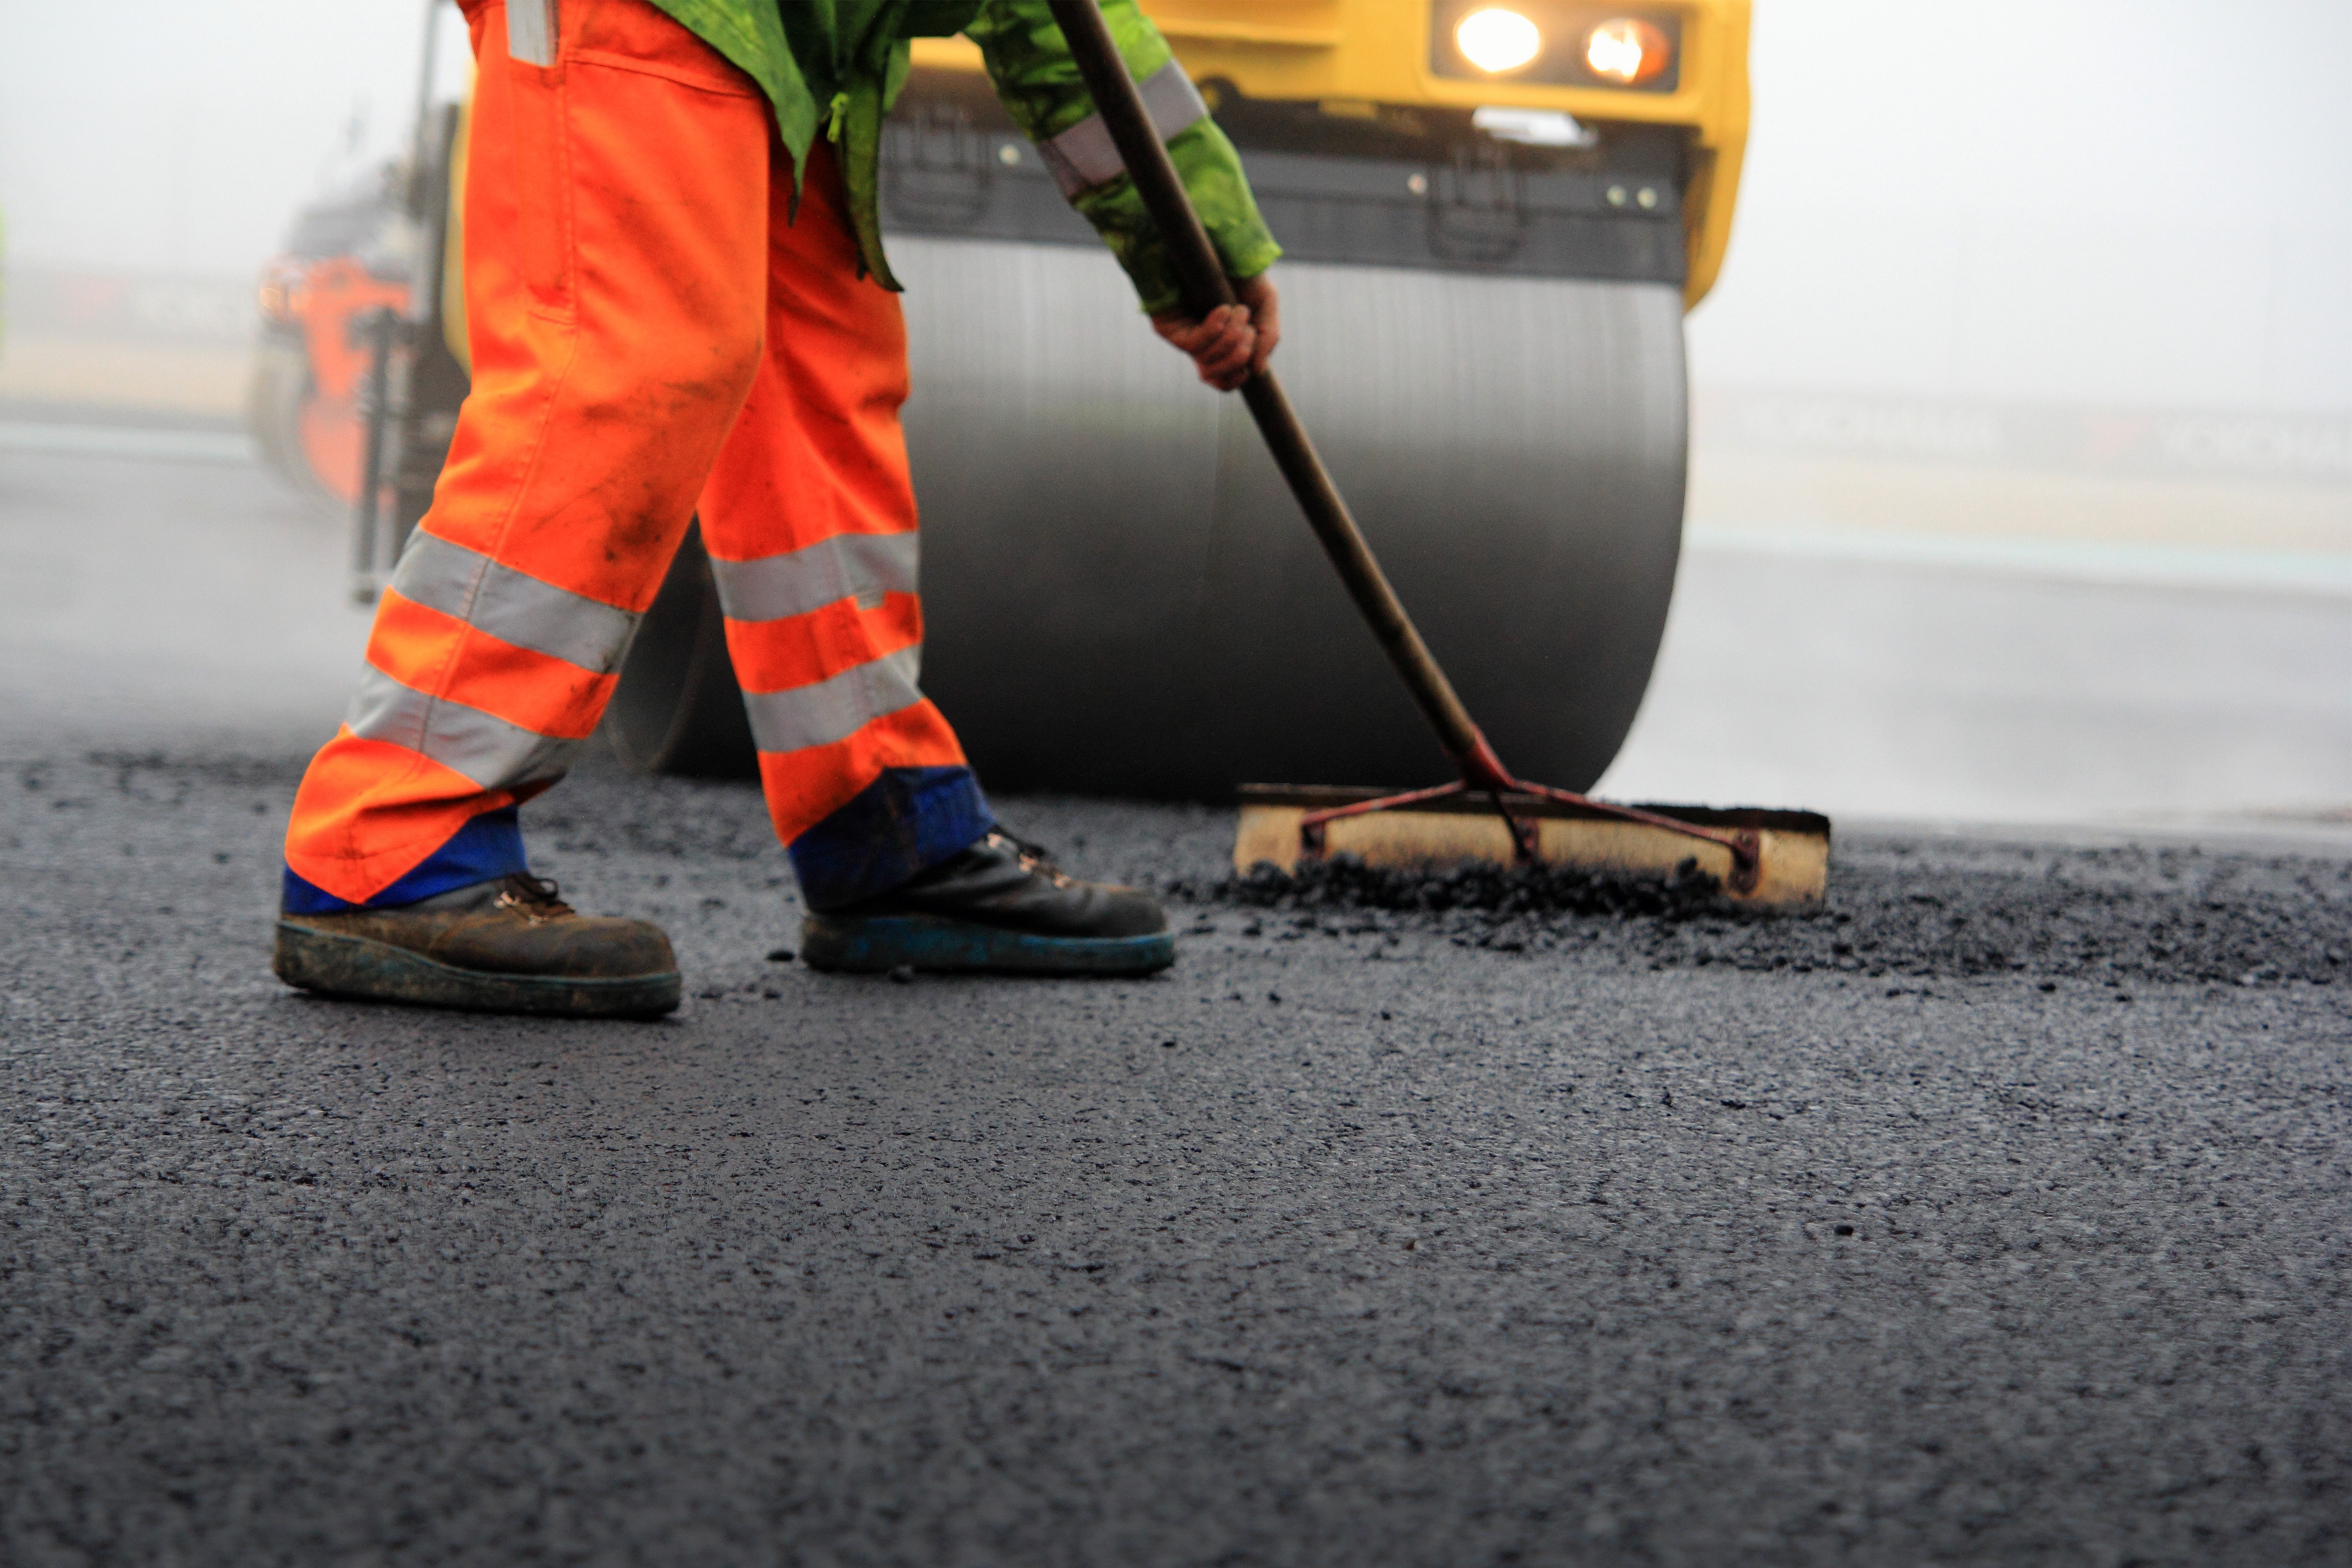 Uniform application of skid resistant chippings on road surfaces